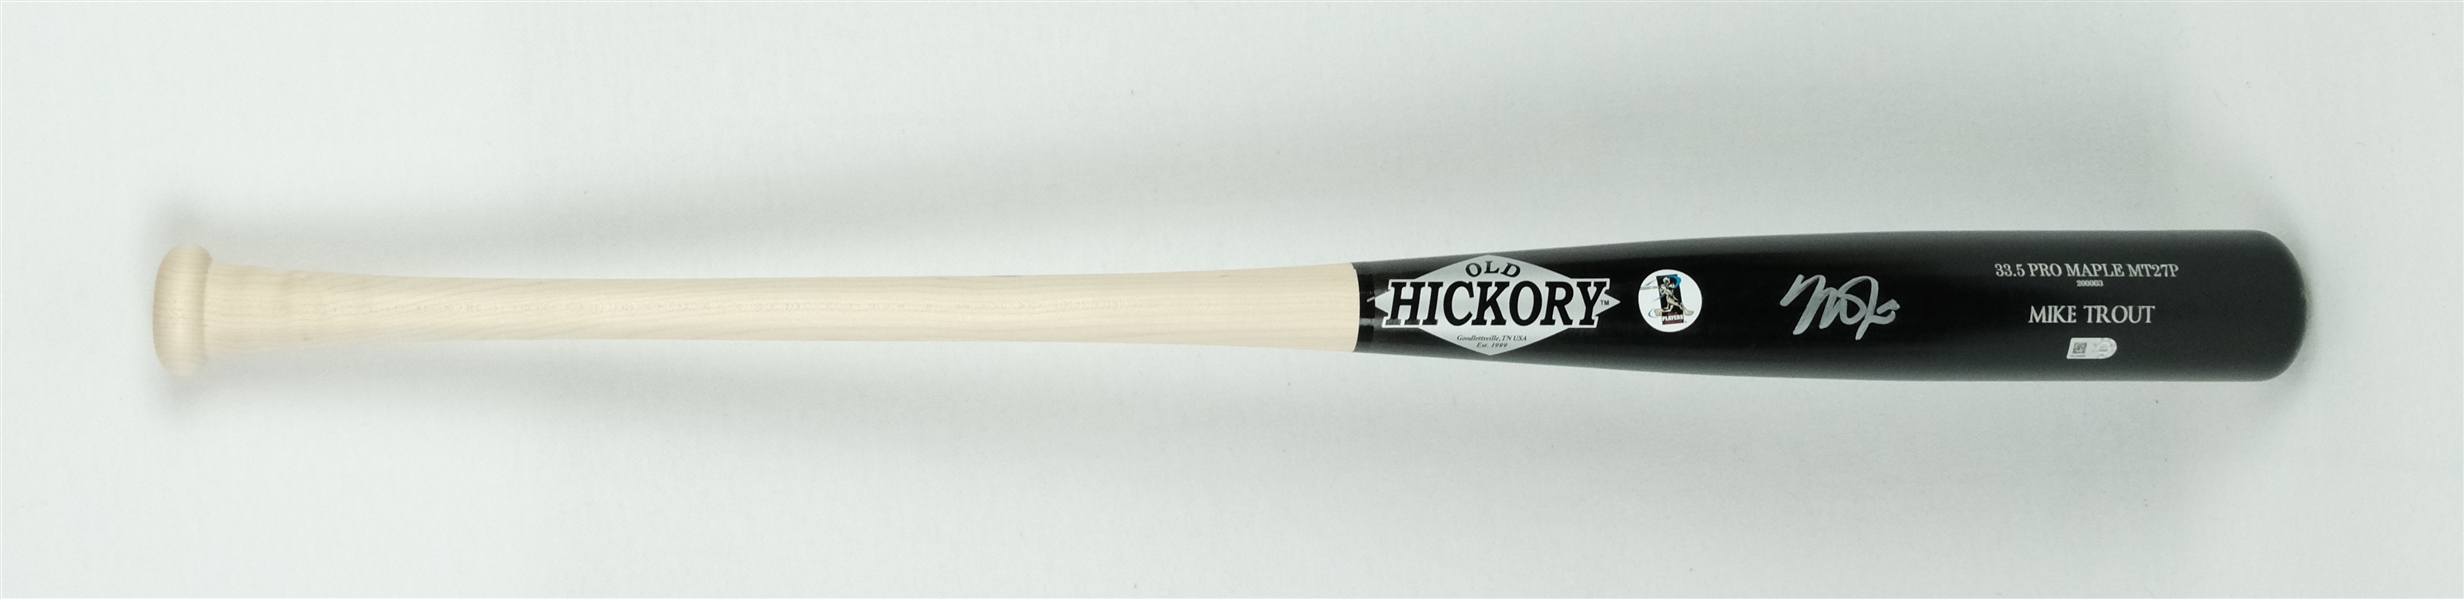 Mike Trout Autographed Old Hickory Baseball Bat MLB